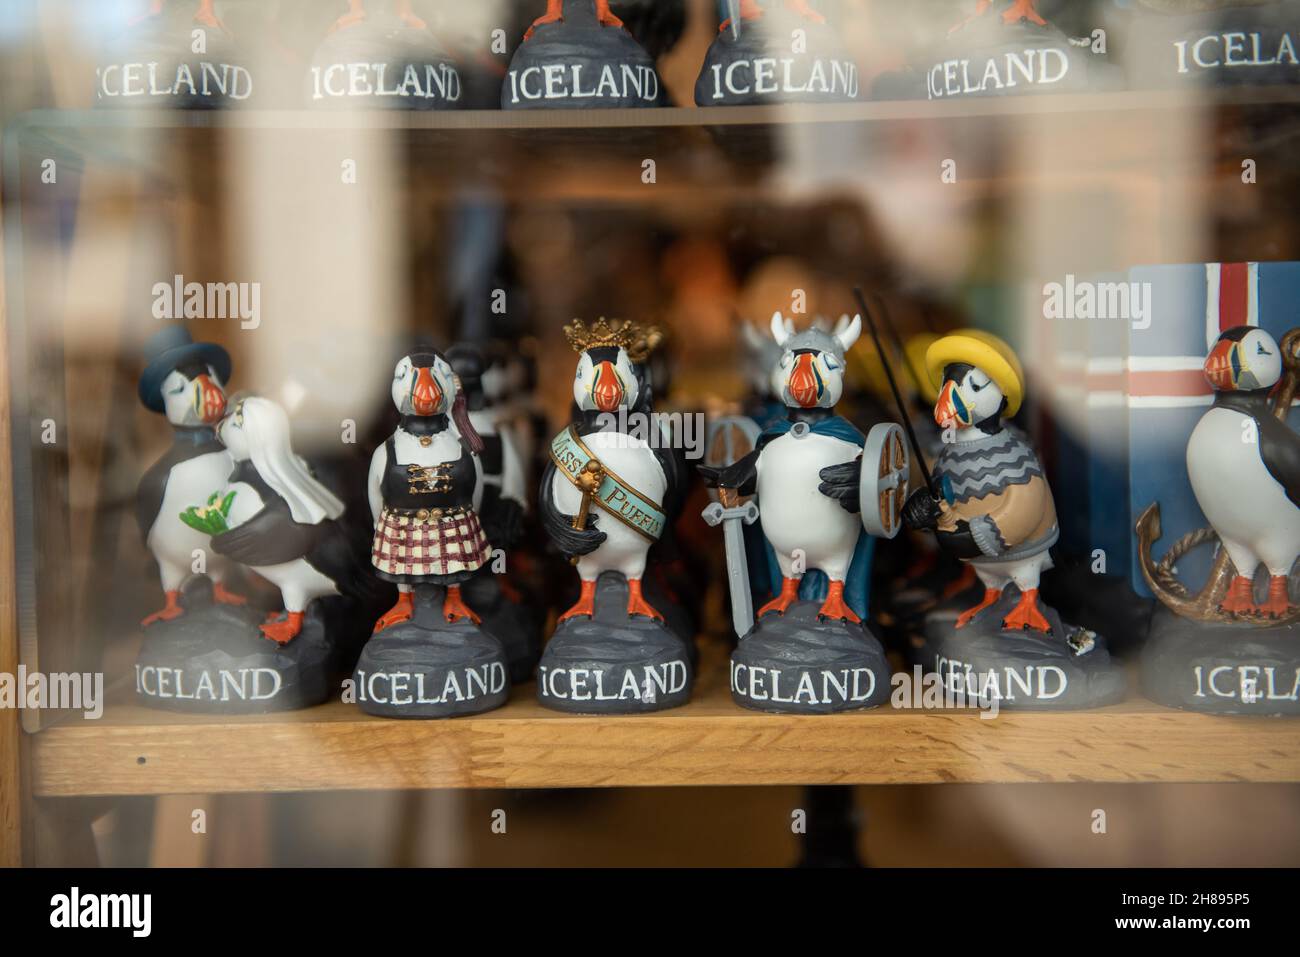 Collection of Puffin Statuettes on Sale at a gift shop in Reykjavik, iceland Stock Photo